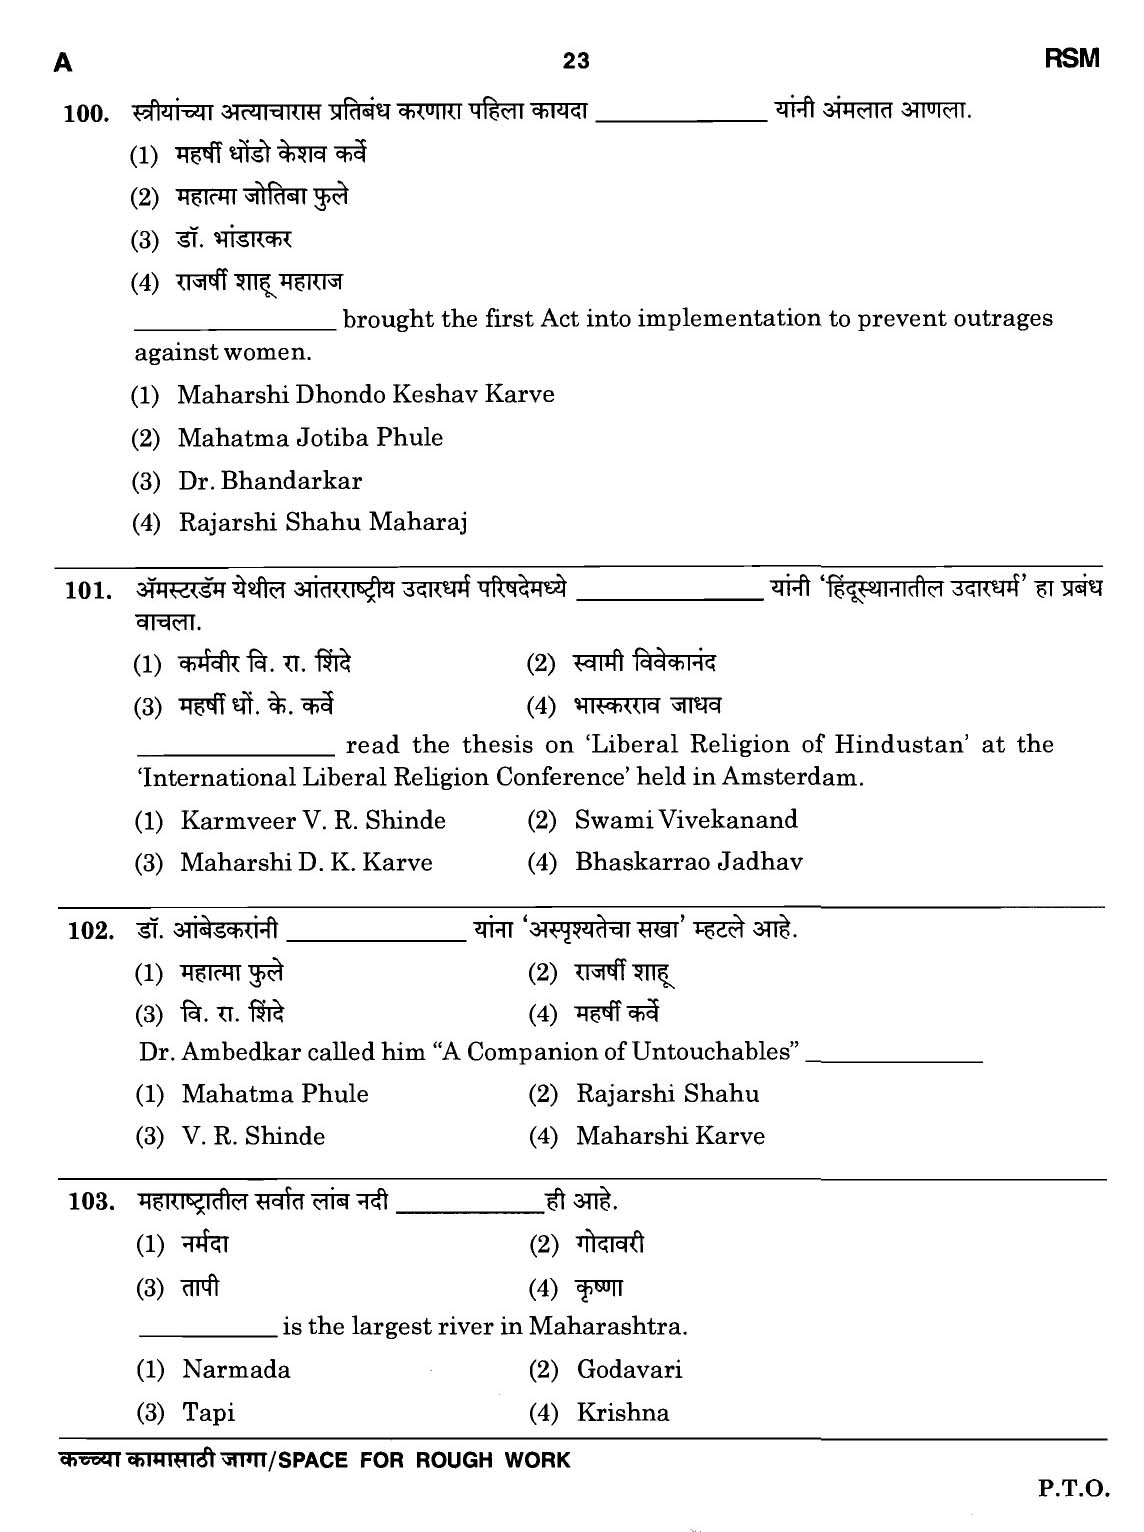 MPSC Agricultural Services Preliminary Exam 2011 Question Paper 22